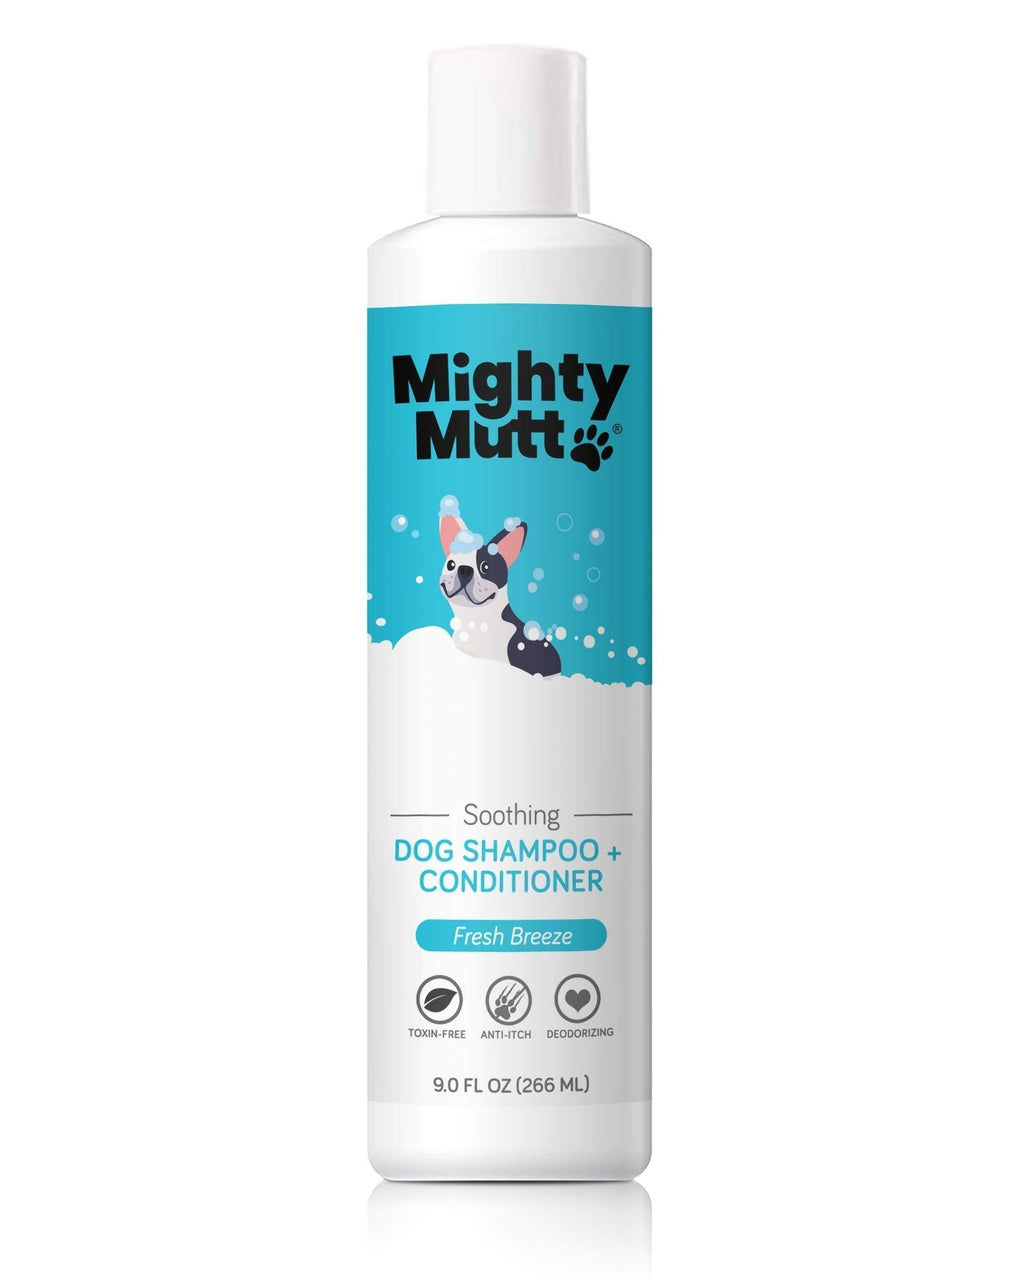 Mighty Mutt Natural & Hypoallergenic Dog Shampoo and Conditioner, Anti-Itch, Soothing and Deodorizing (9oz) - PawsPlanet Australia